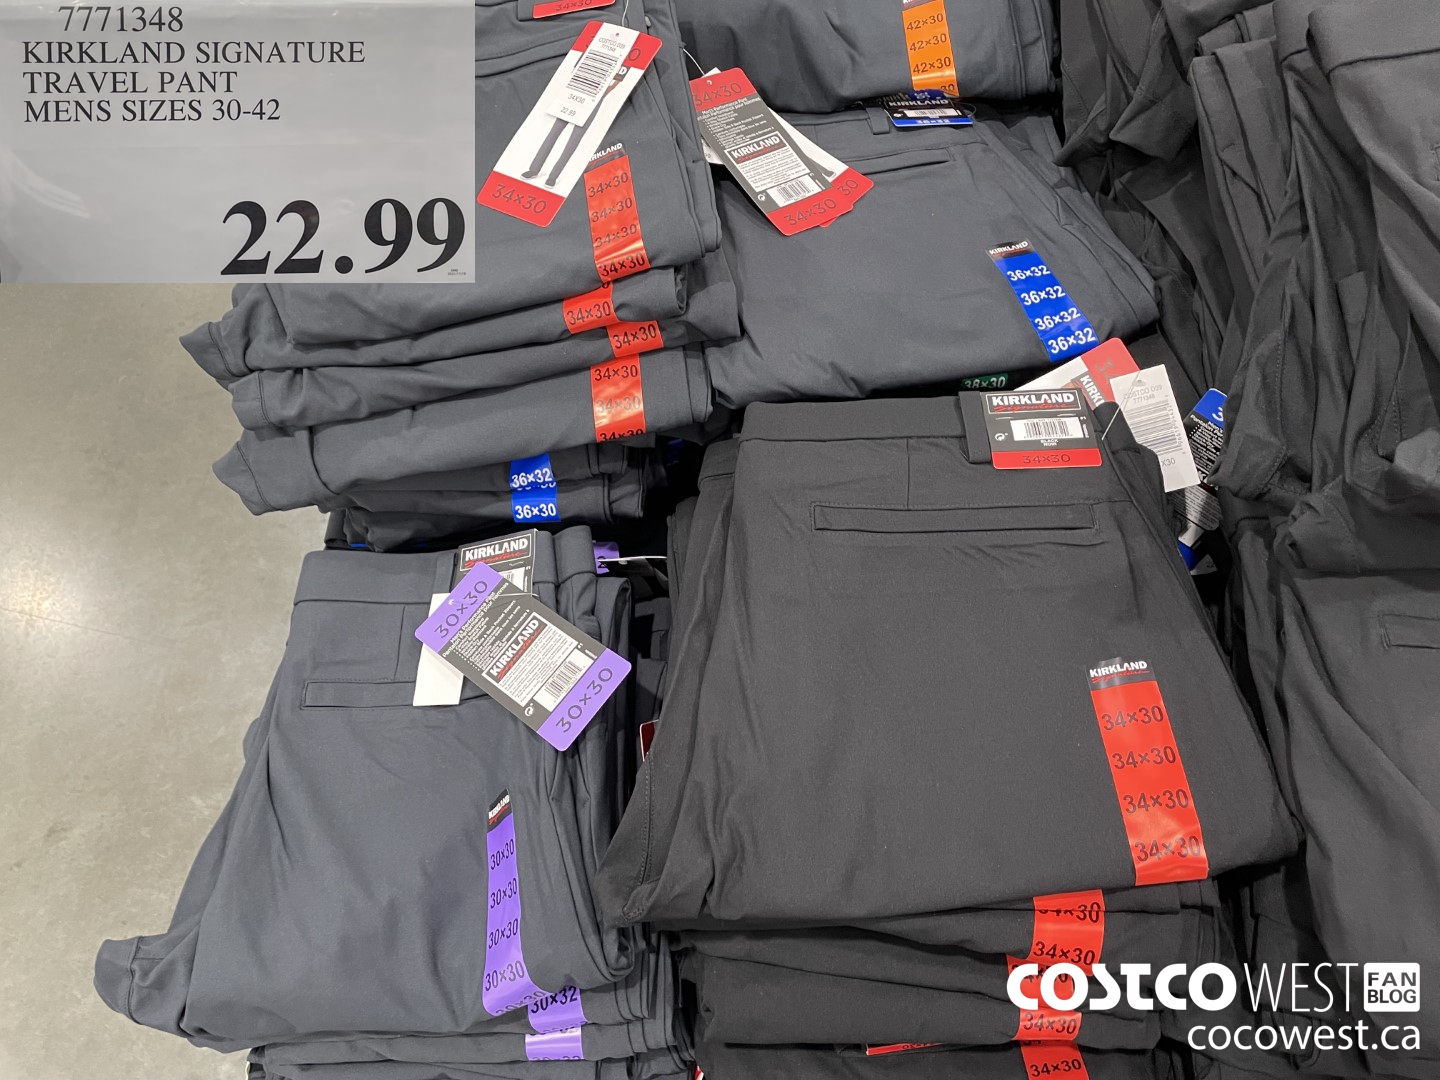 Costco 2021 Superpost! The Entire Clothing & Undergarment Section - Costco  West Fan Blog